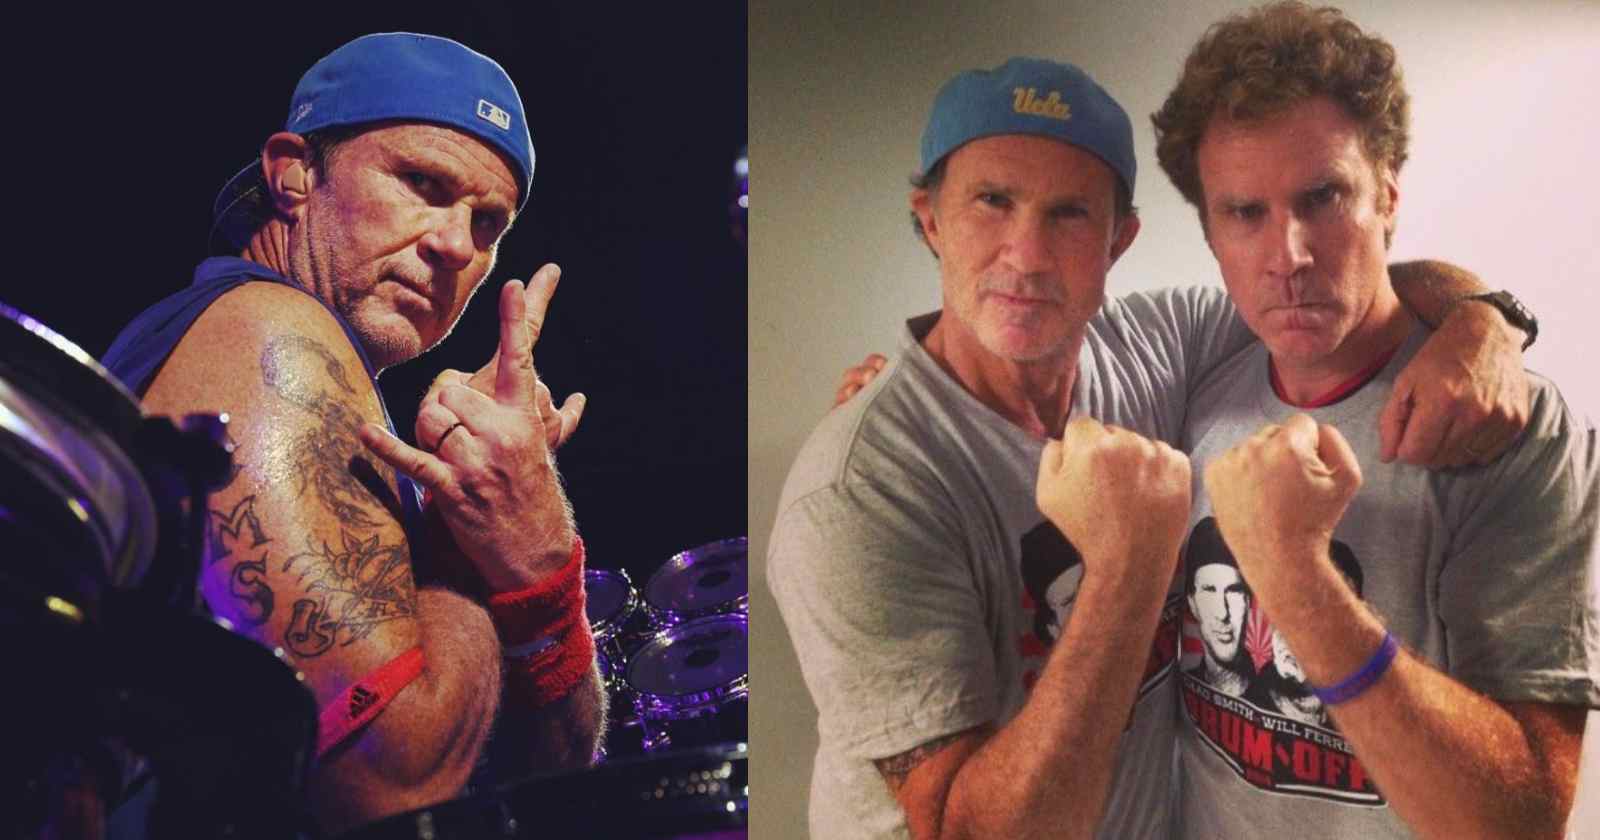 absorption Vie Dominerende 6 drummers that Red Hot Chili Peppers' Chad Smith listed as influences